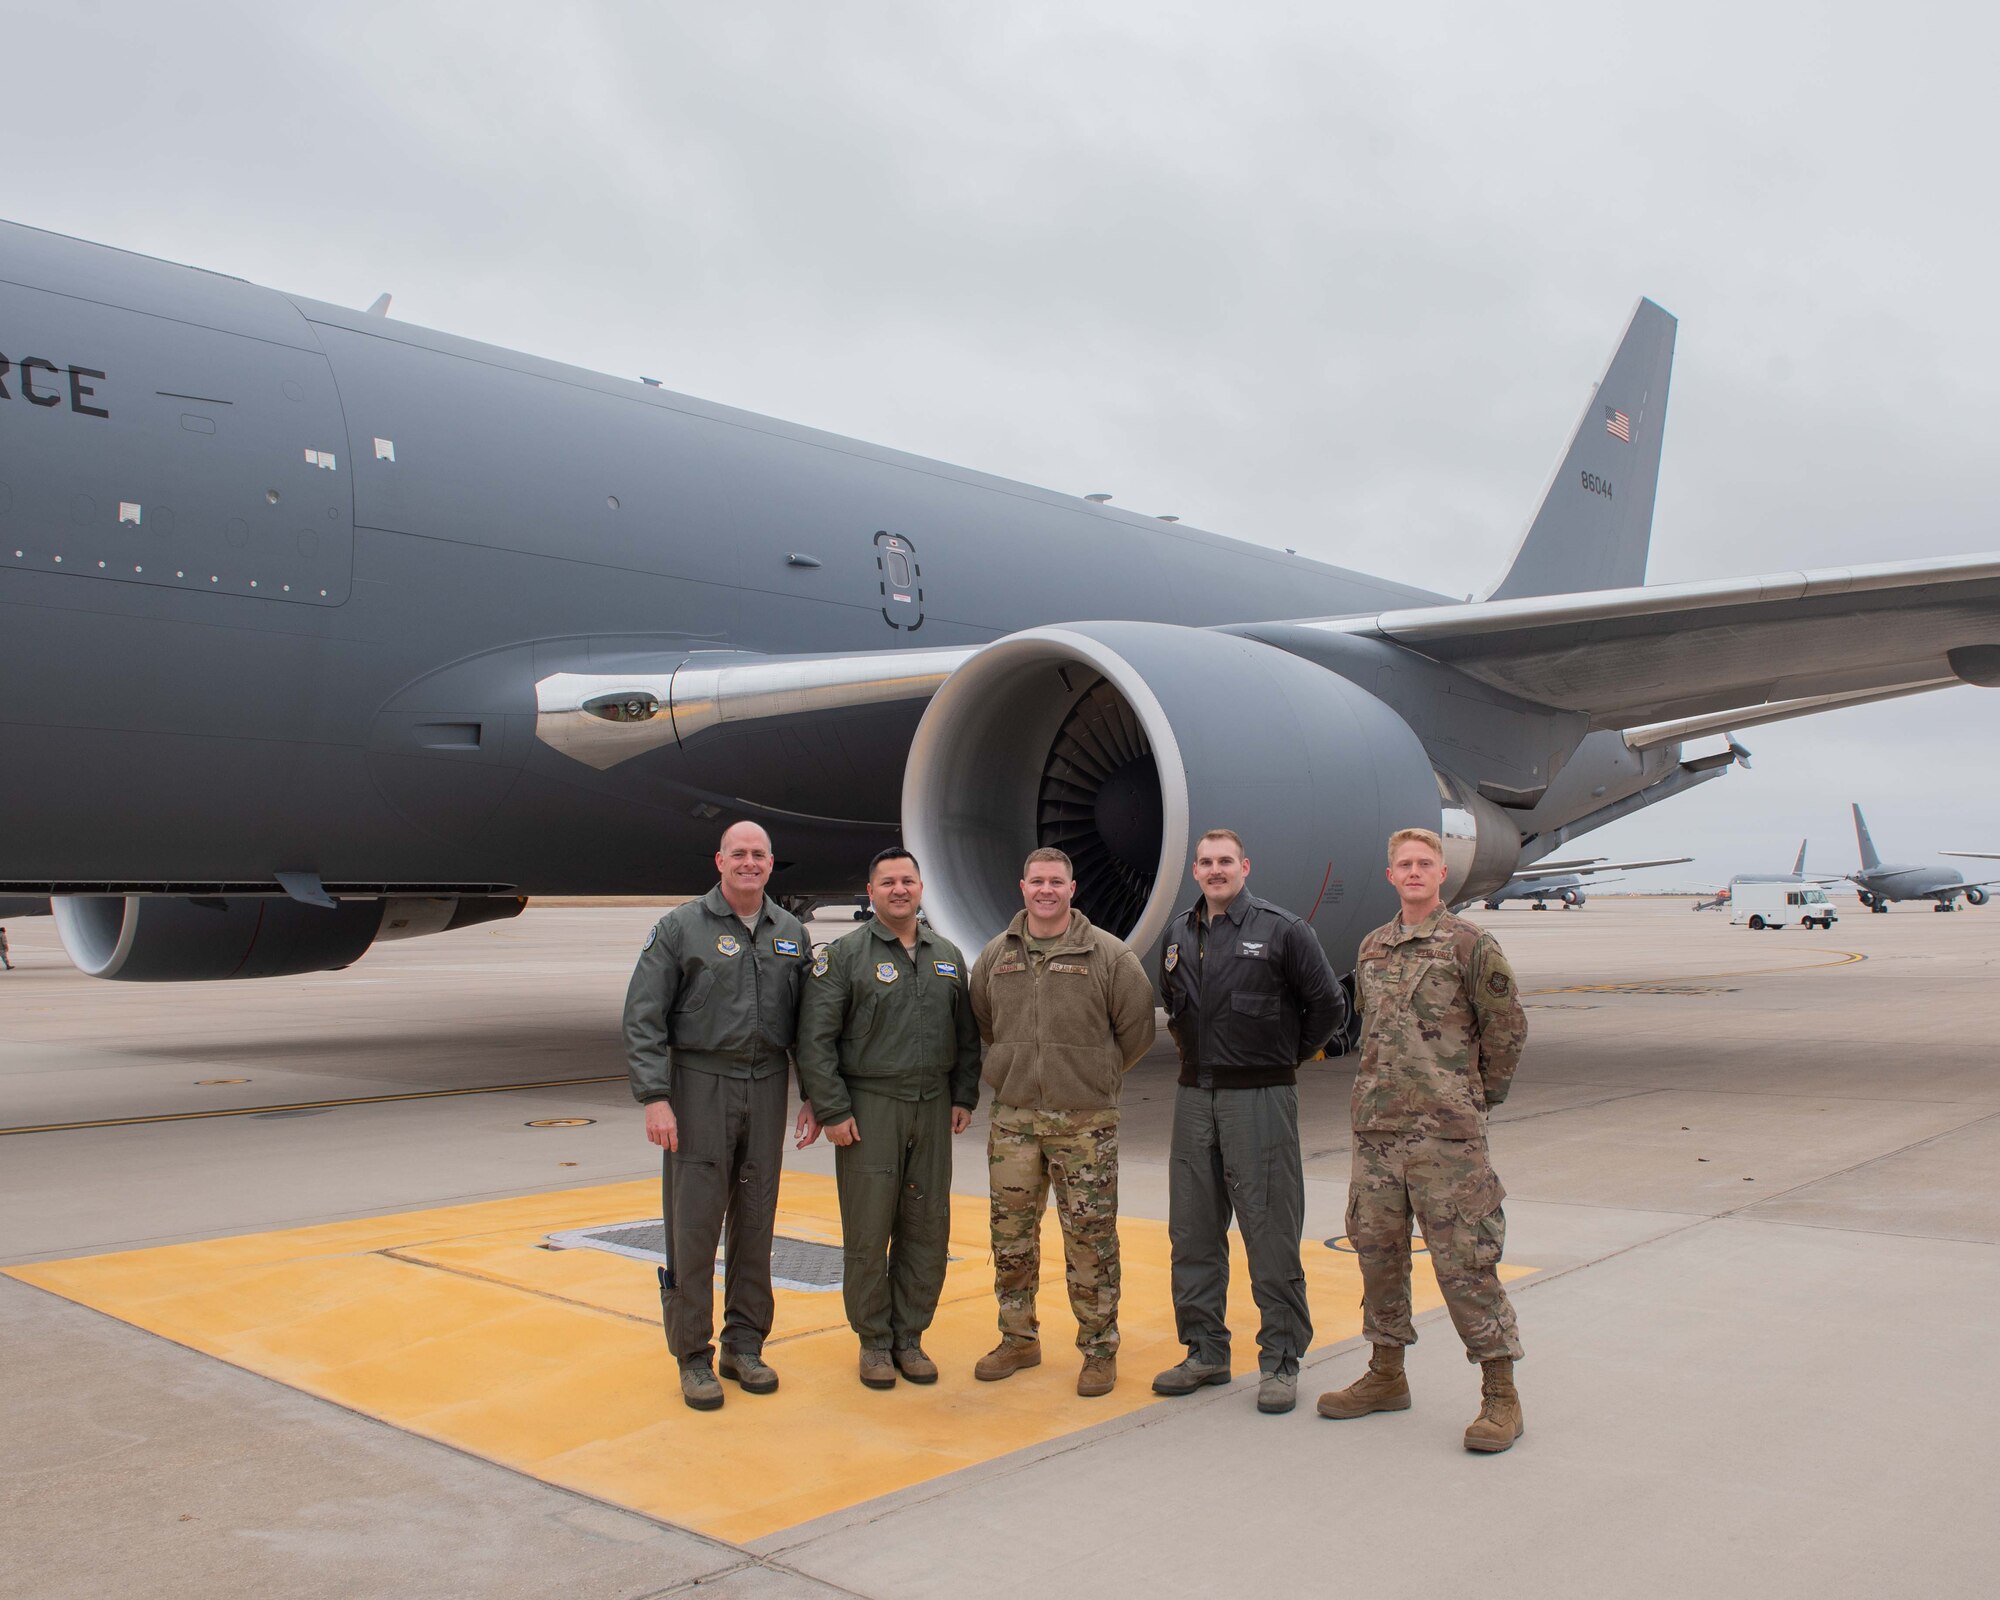 Brig. Gen. Darren V. James, left, Air Mobility Command KC-46 Pegasus Enterprise Lead, poses for a photo with the aircrew that delivered McConnell’s 17th KC-46 Nov. 22, 2019, at McConnell Air Force Base, Kan. McConnell has 19 KC-46s, the Air Force’s newest aircraft, which is the future of aerial refueling. (U.S. Air Force photo by Staff Sgt. Chris Thornbury)